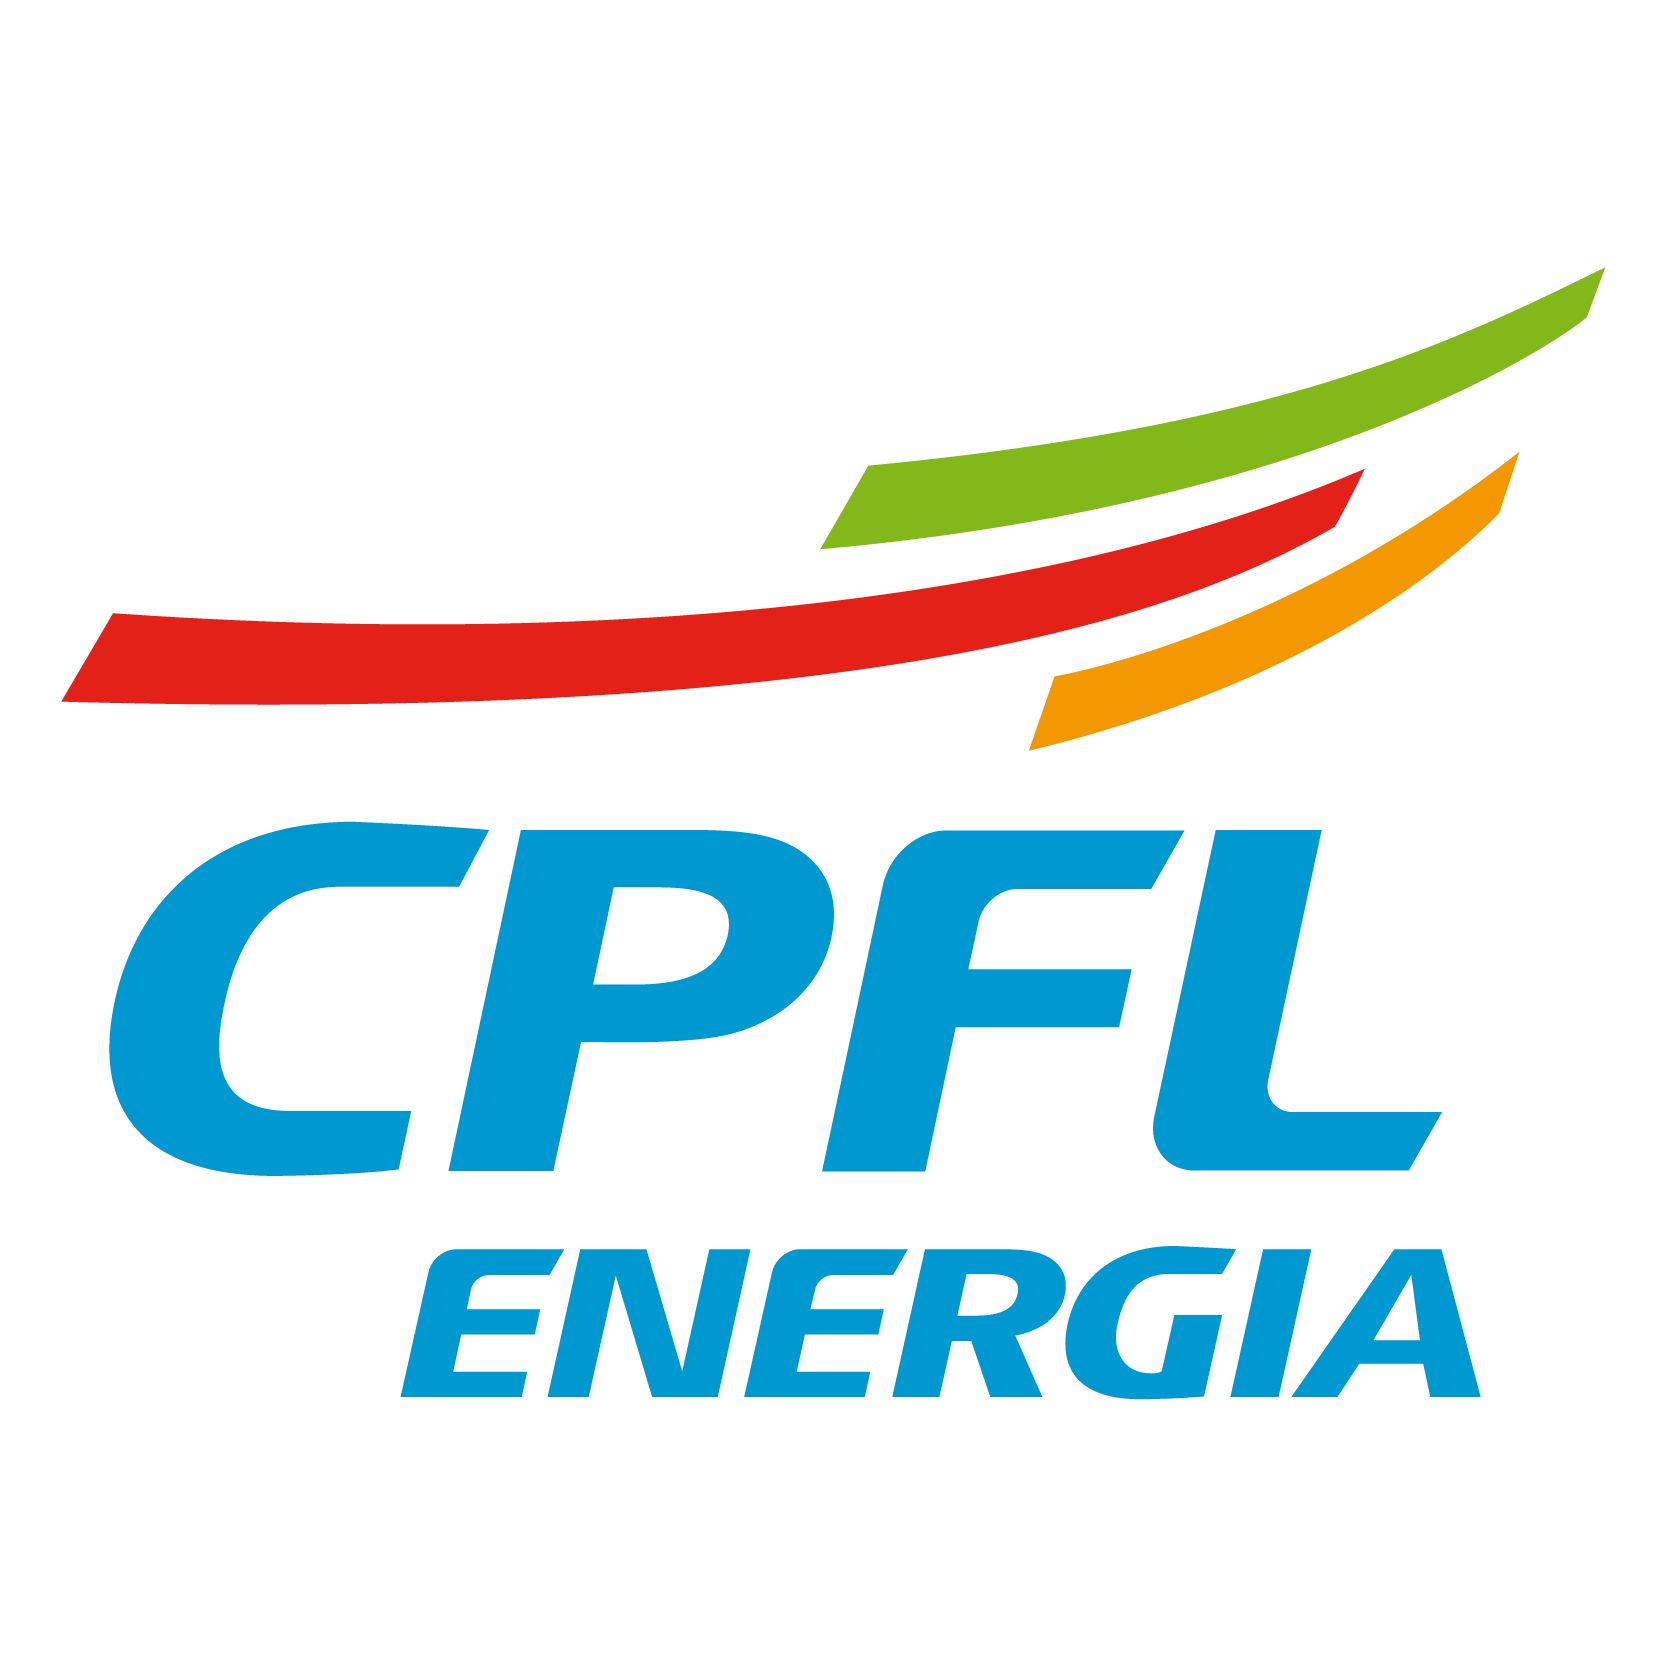 CPFL Energia Logo png